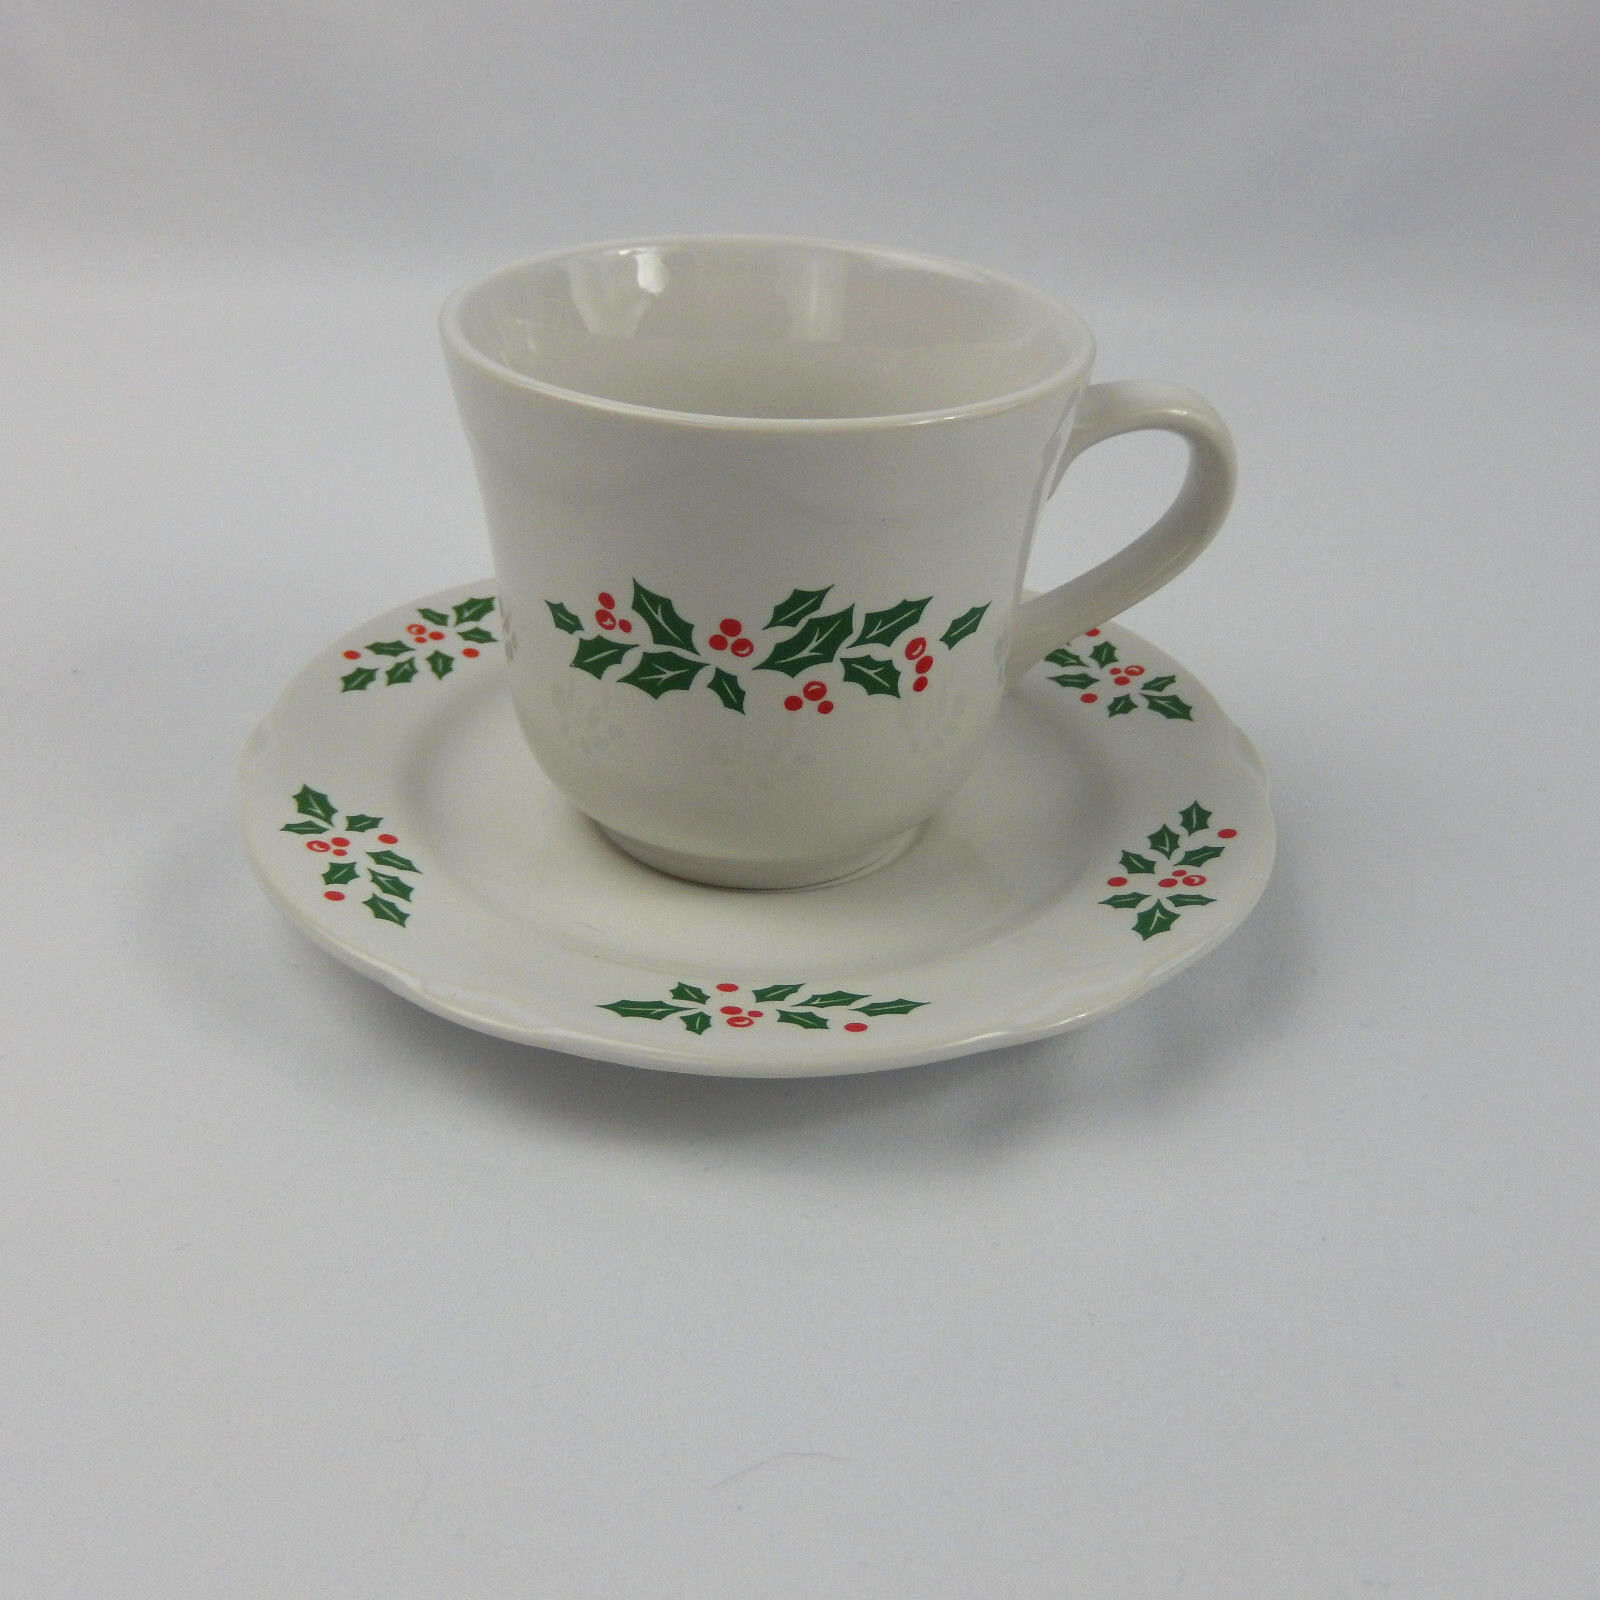 CORNING DESIGNS Winter Holly Coffee Cup and Saucer Scalloped Edge Christmas - $9.89